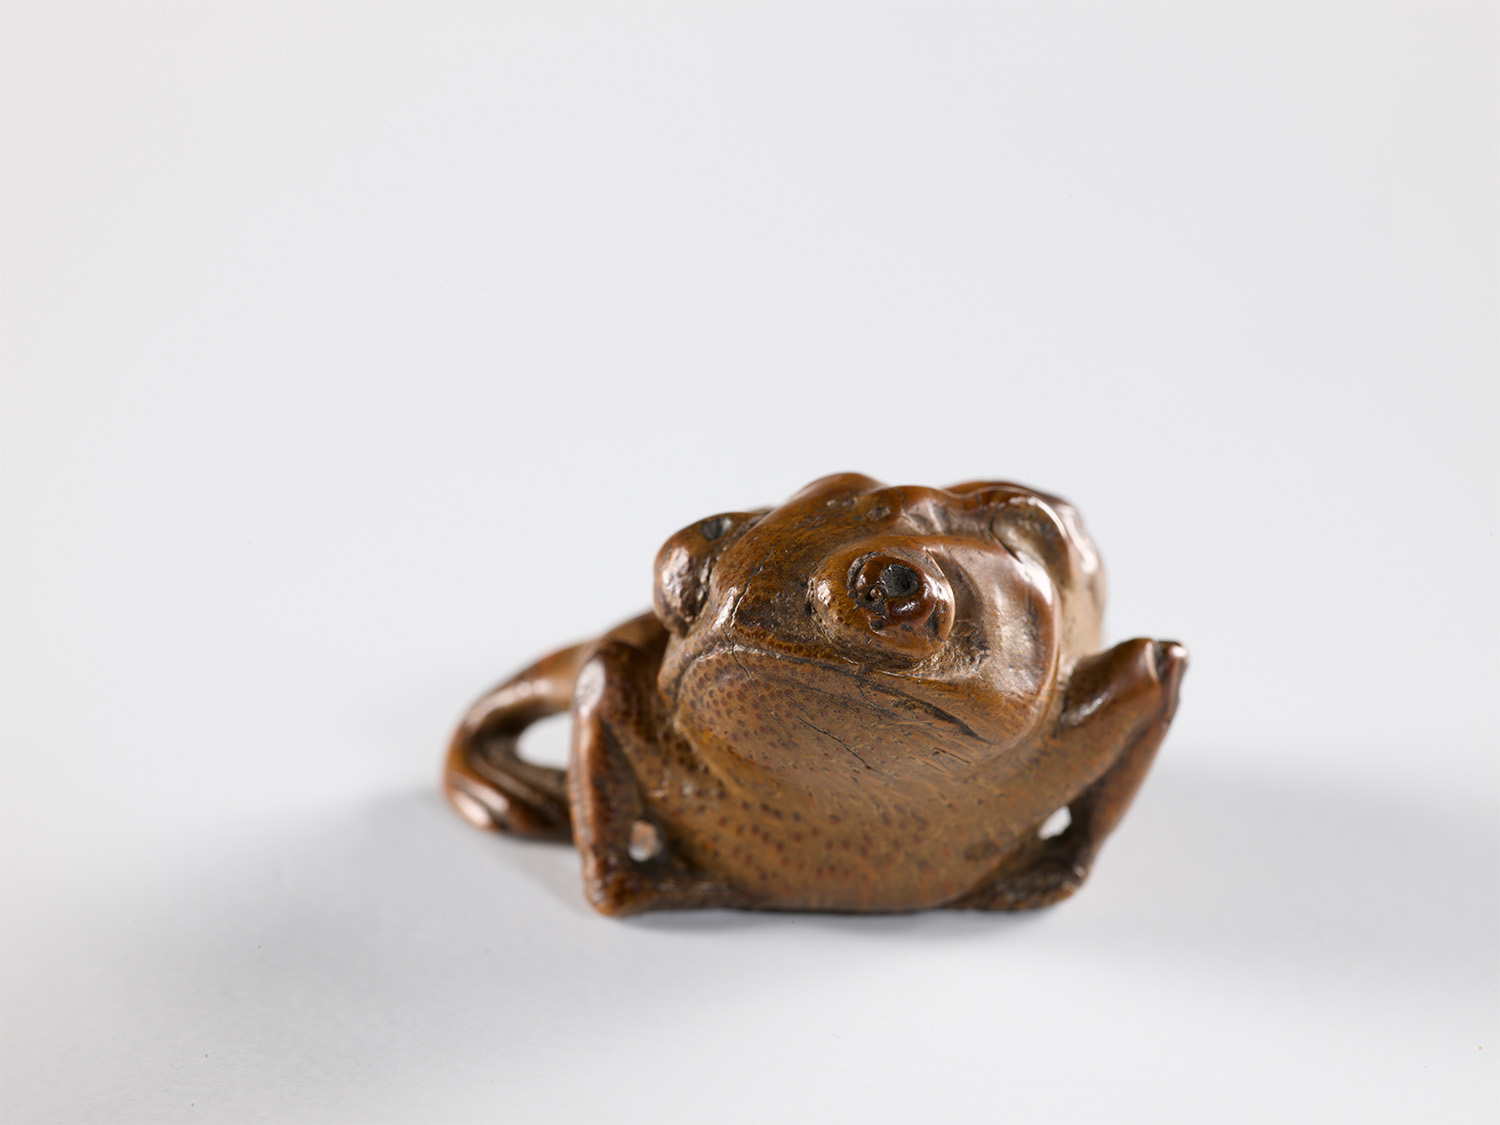 Zhu Ying<br> Bamboo toad carved in the round, Mark of "Zhu Ying"